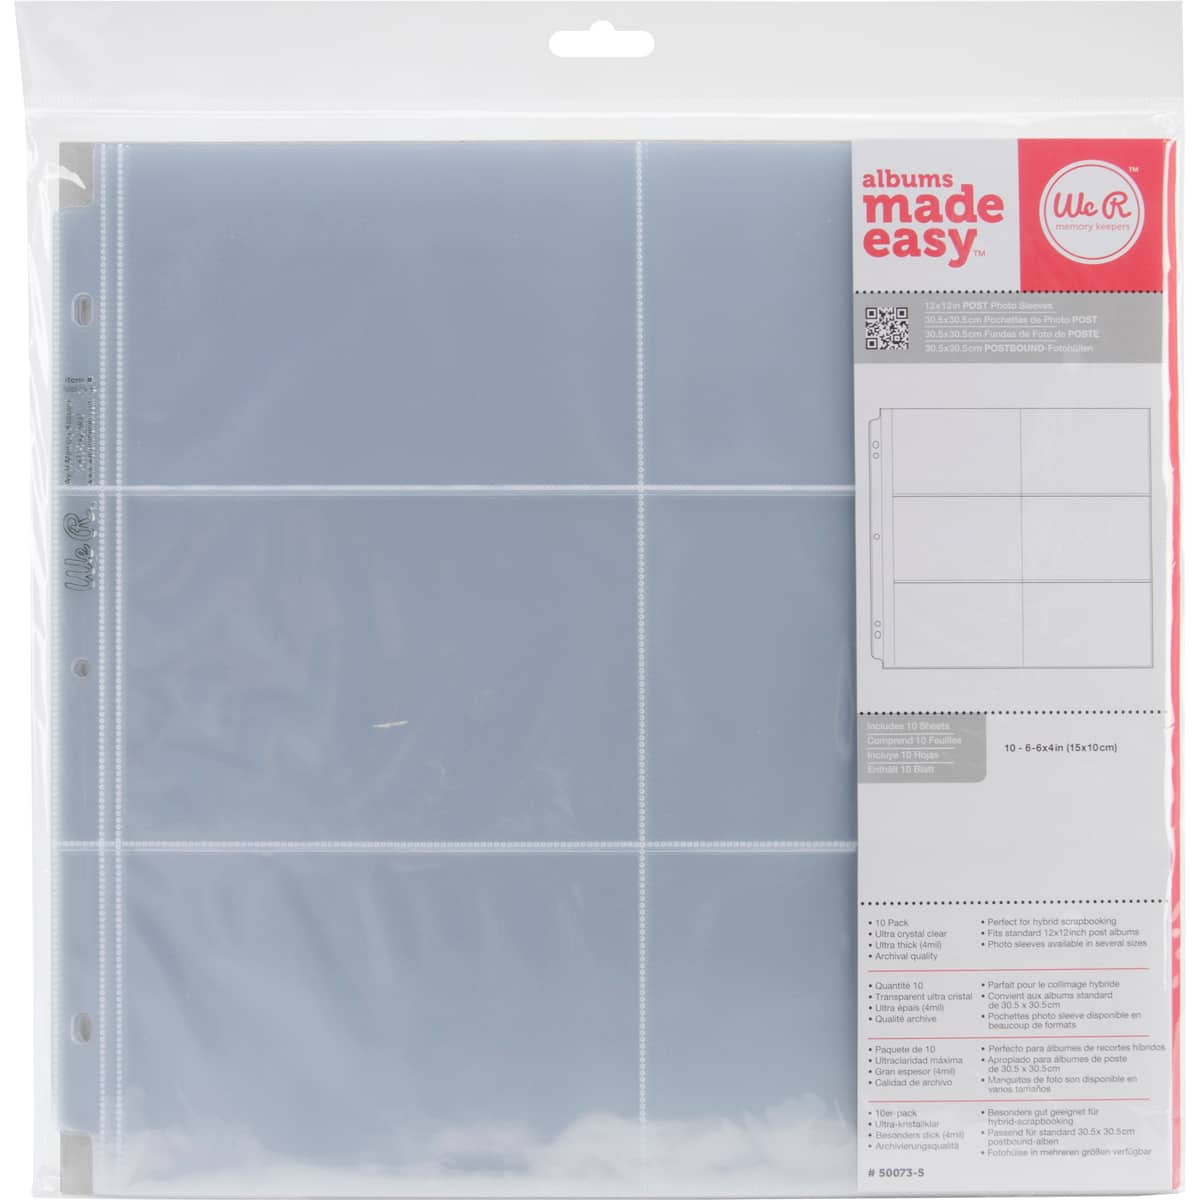 We R Memory Keepers® 12 x 12 Ring Page Protectors, 50ct.